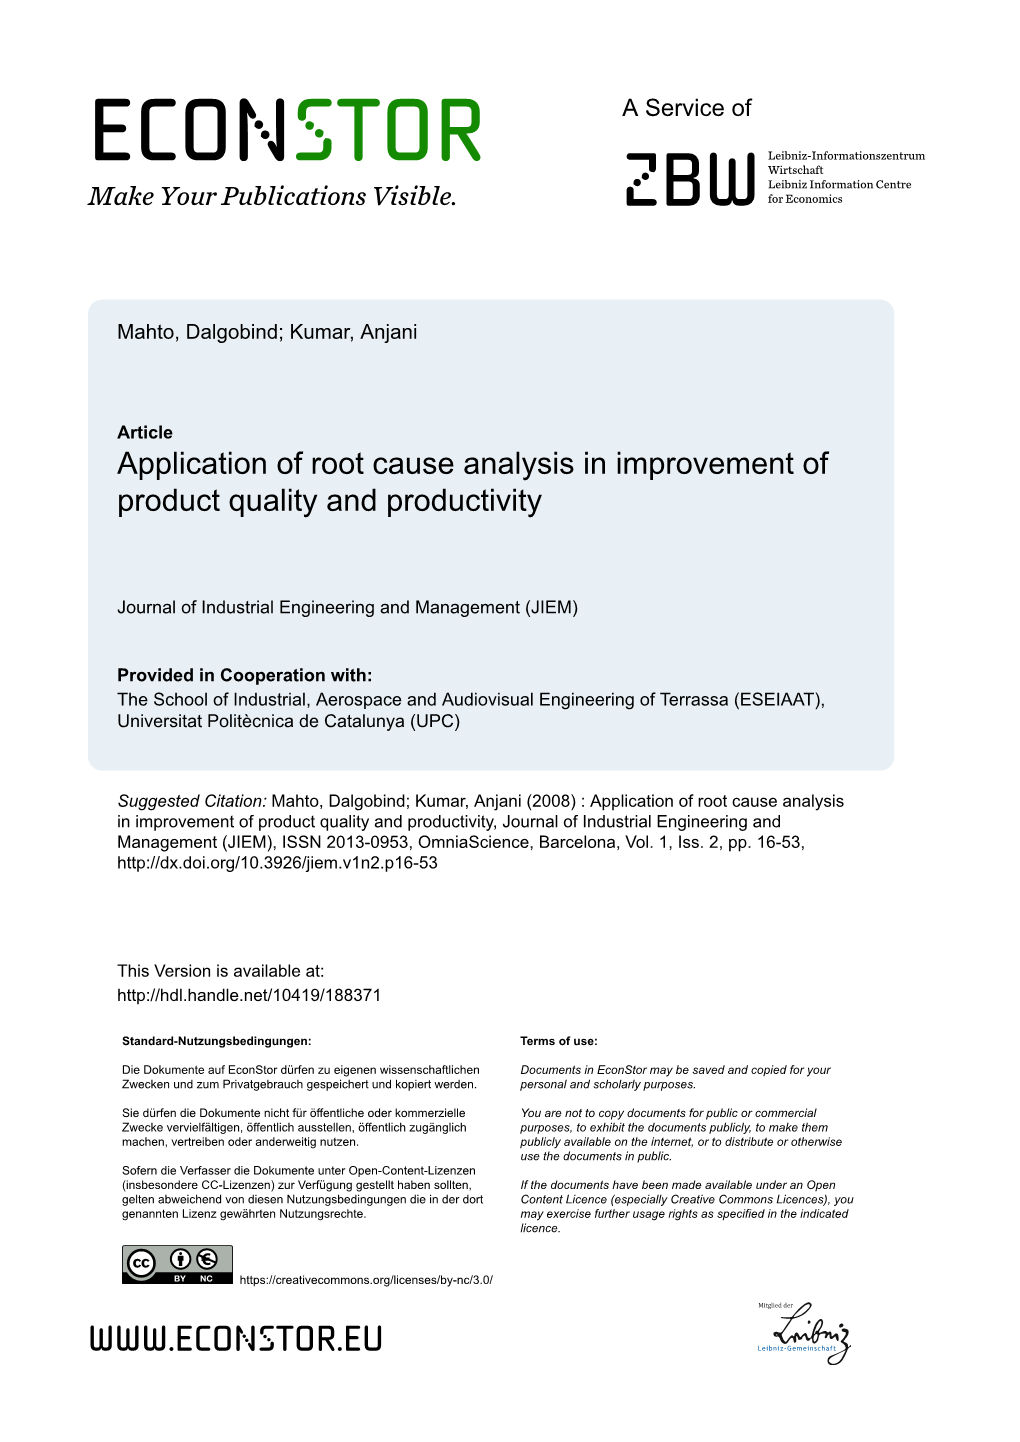 Application of Root Cause Analysis in Improvement of Product Quality and Productivity